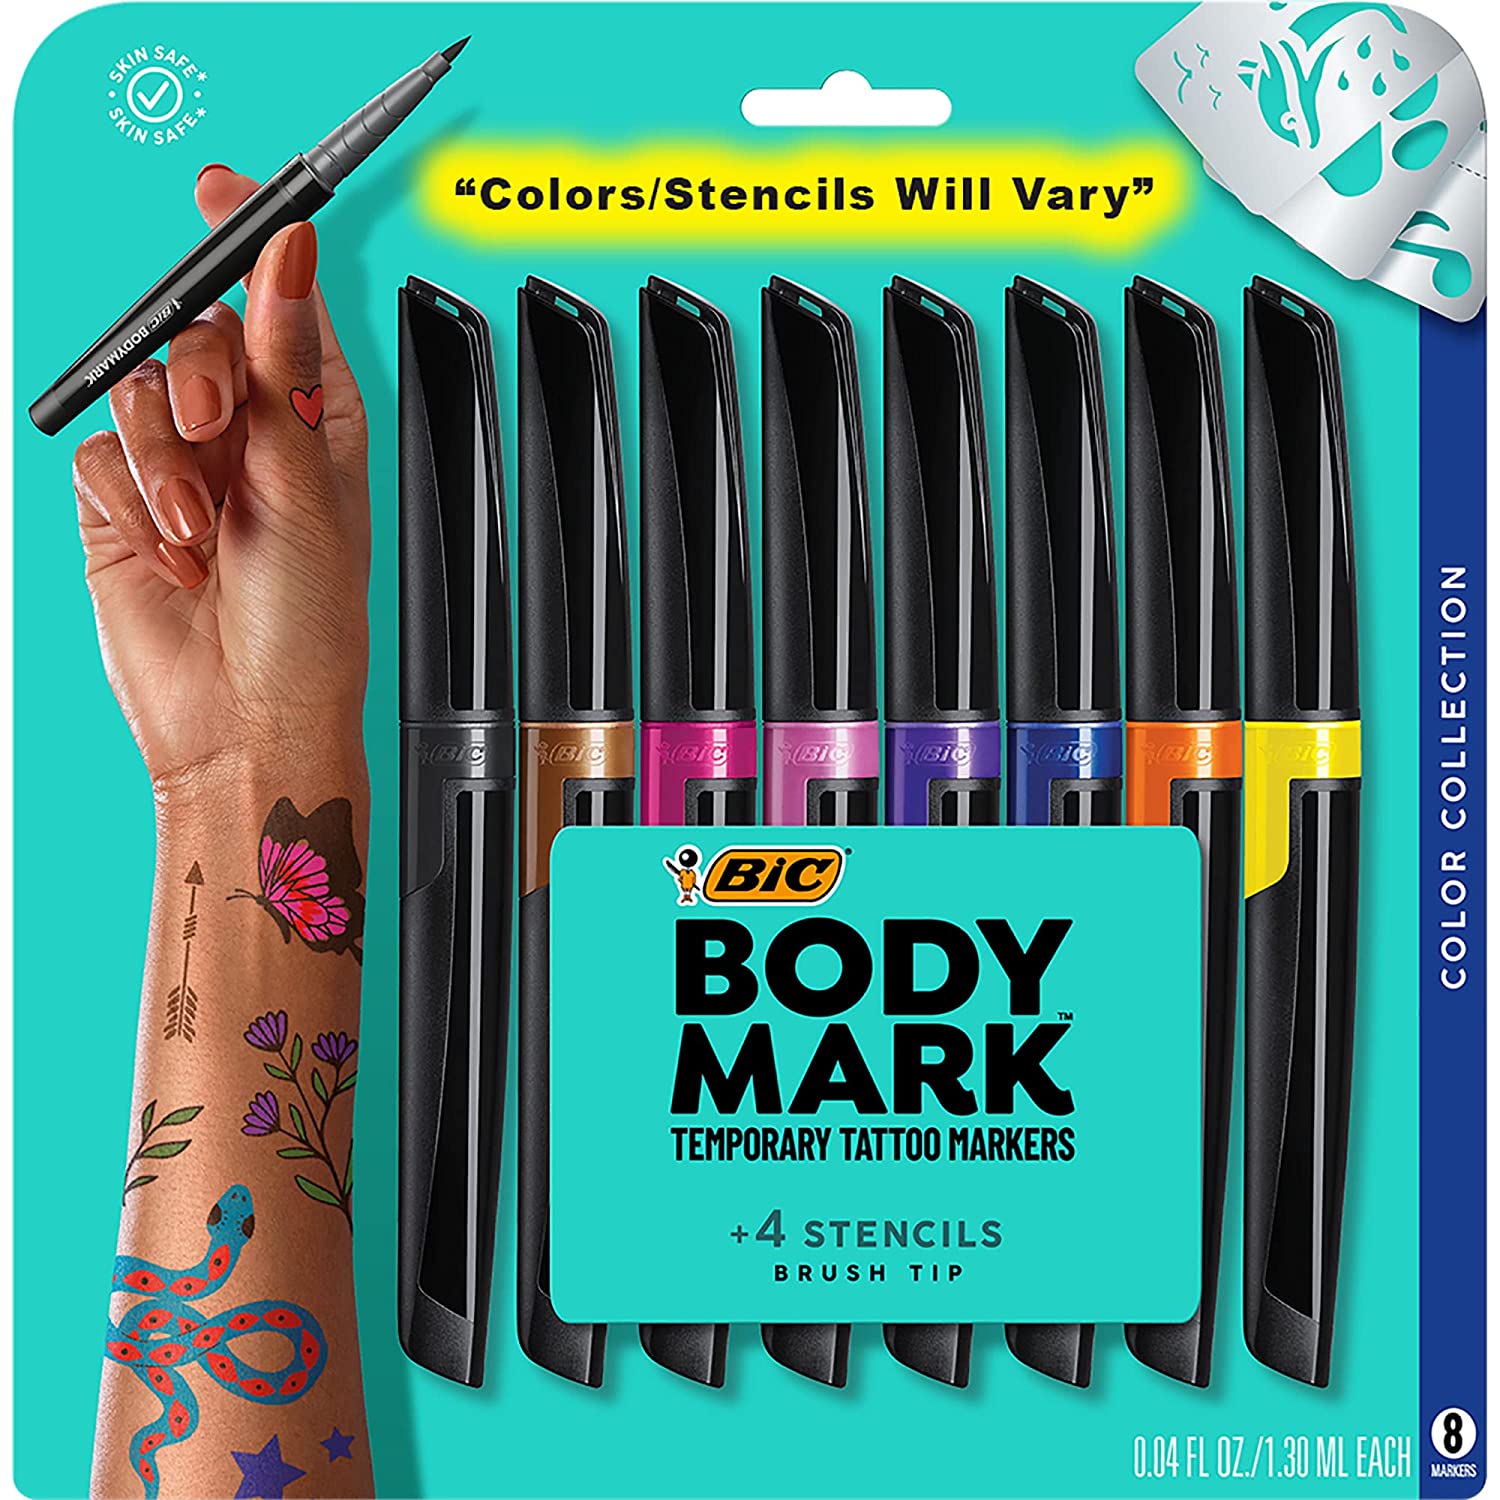 BodyMark by BIC, Temporary Tattoo Marker, Skin Safe, Flexible Brush Tip, Long-Lasting, Assorted Colors, 8-Pack (Colors/Stencils Will Vary)